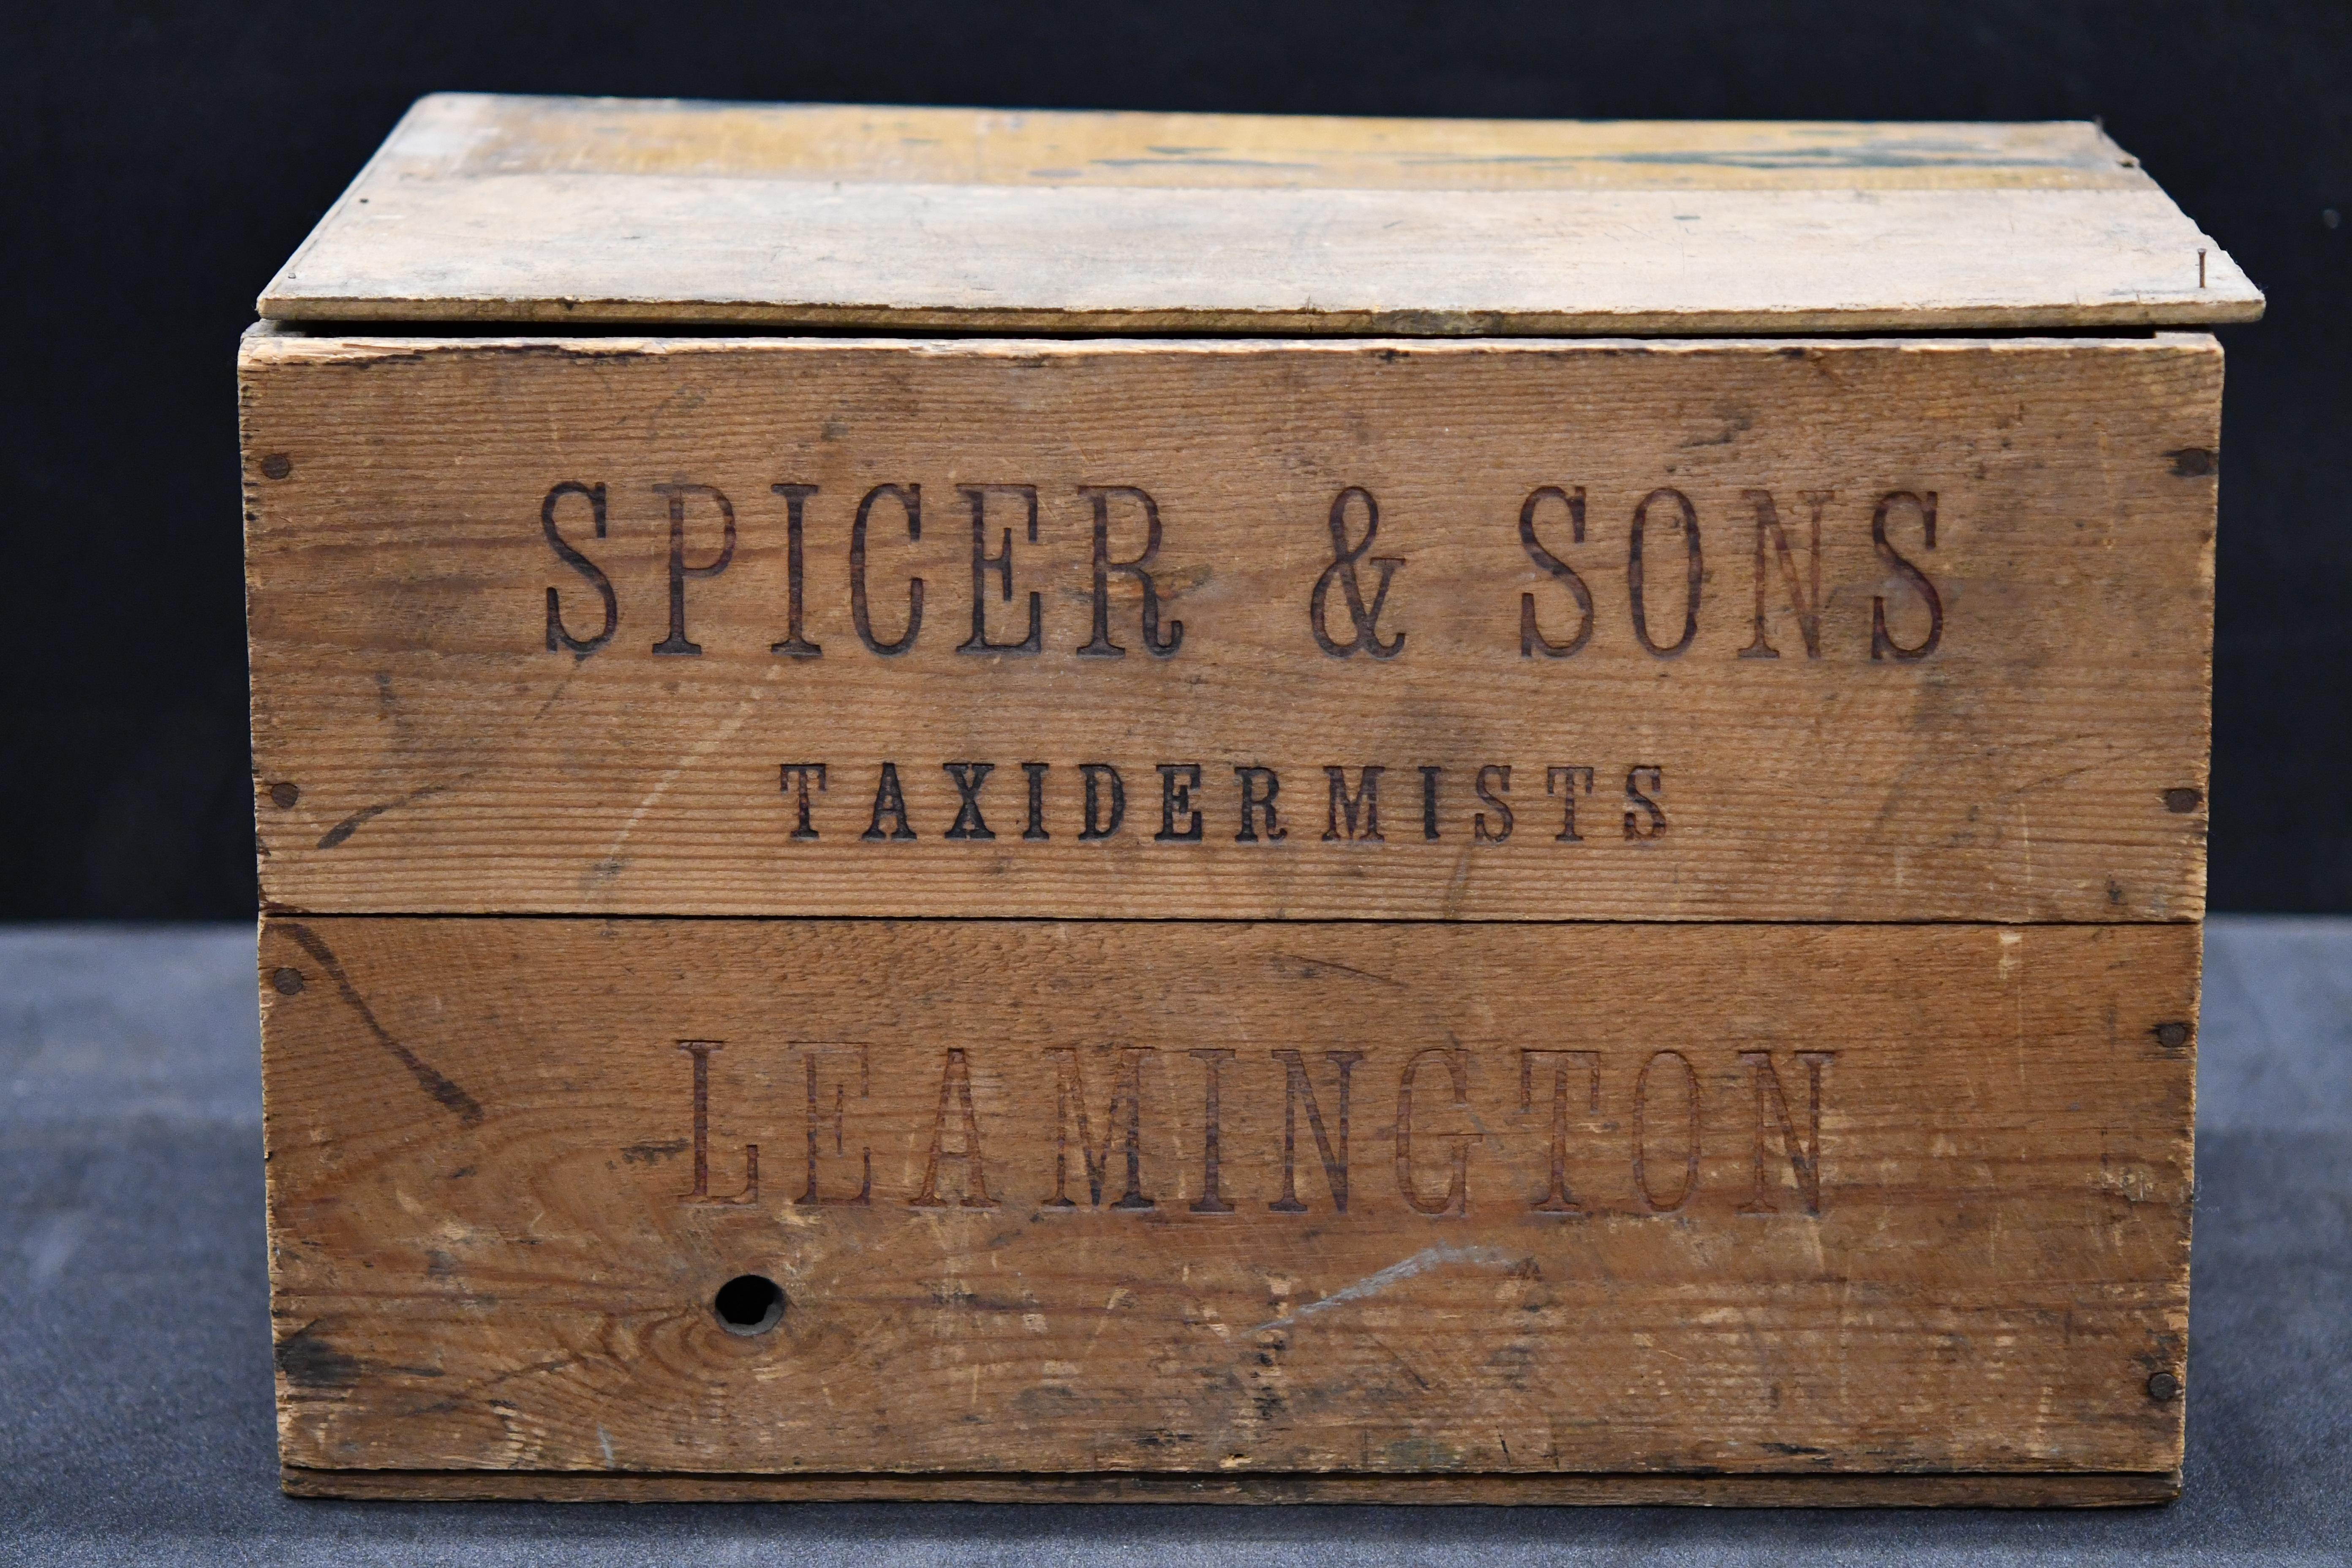 Photograph of an antique spice box